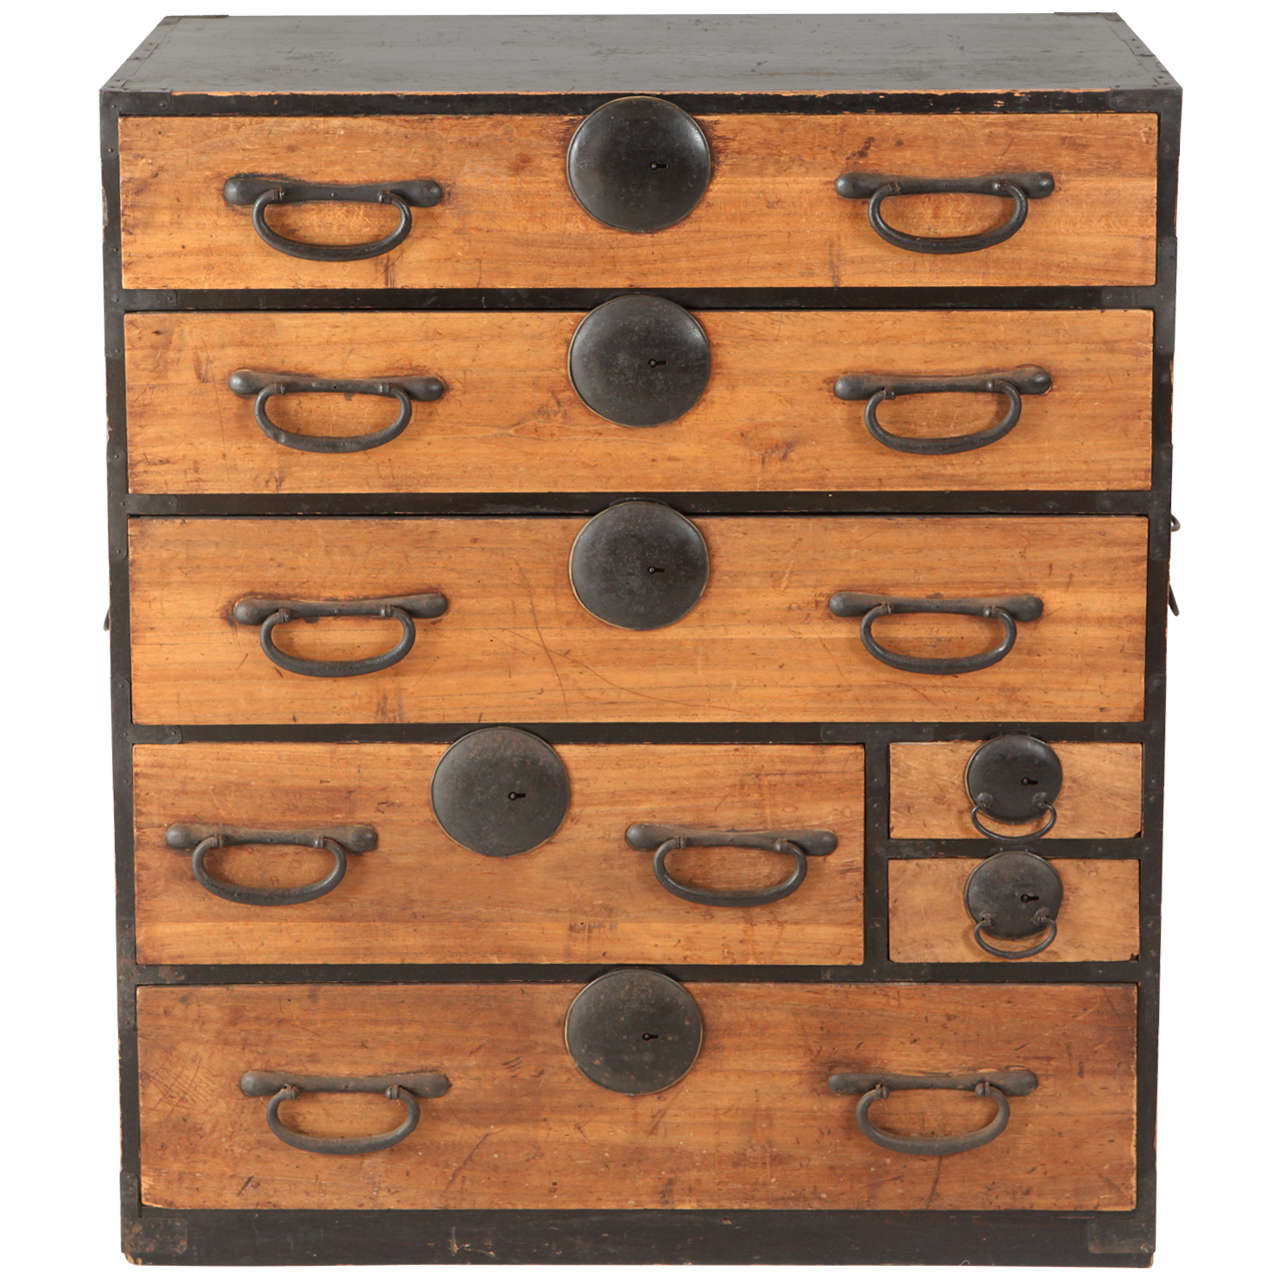 Japanese Chest of Drawers / Tansu